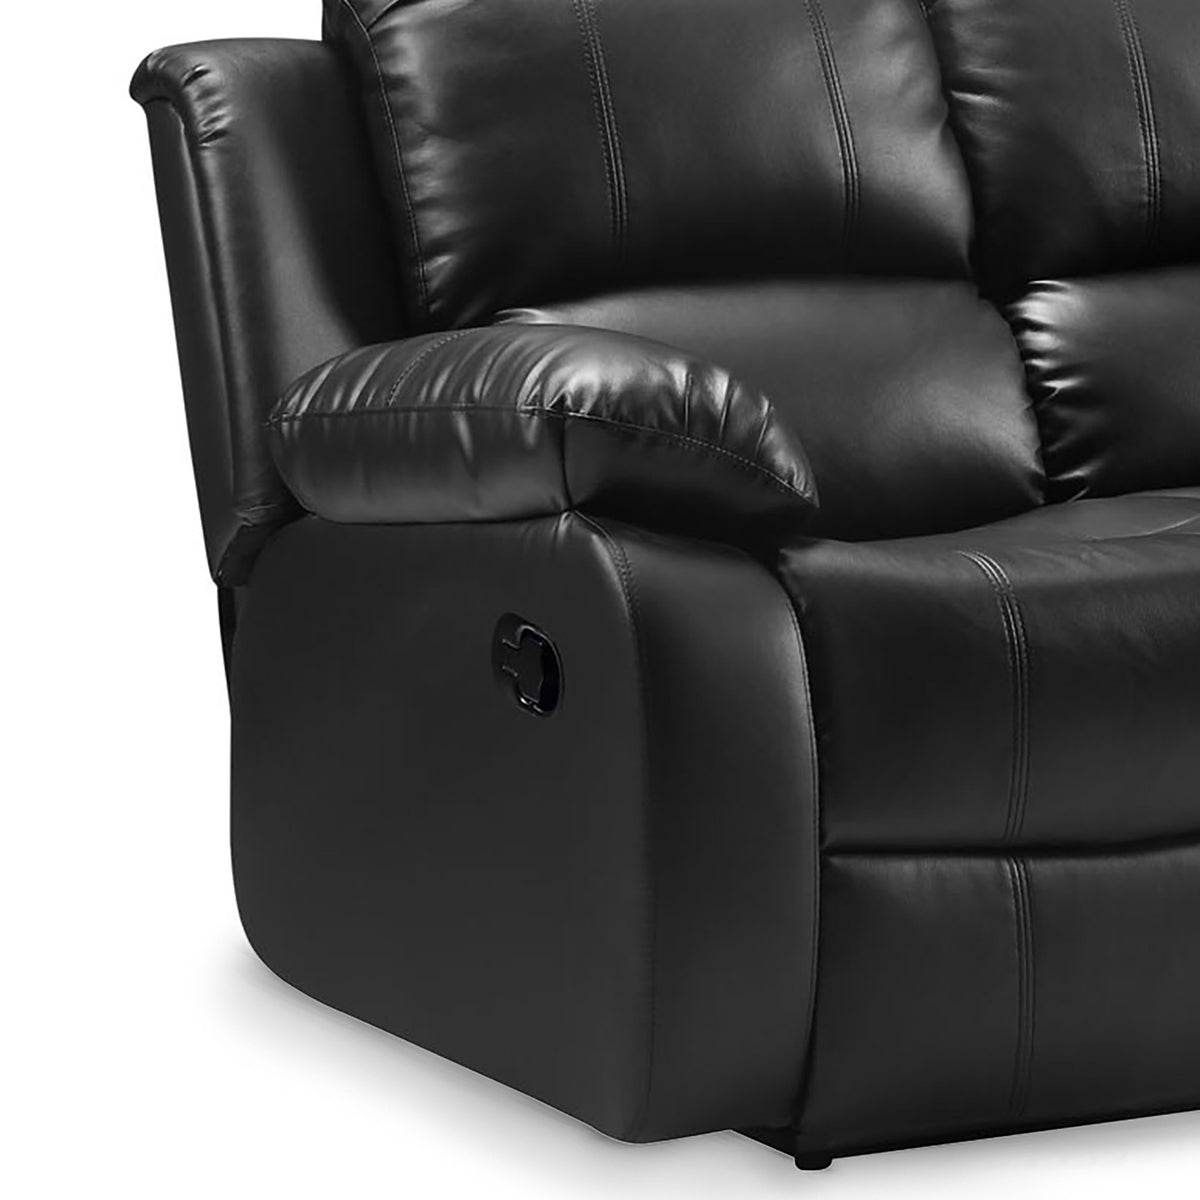 Valencia Black 3 Seater Reclining Air Leather Sofa - Close up of side